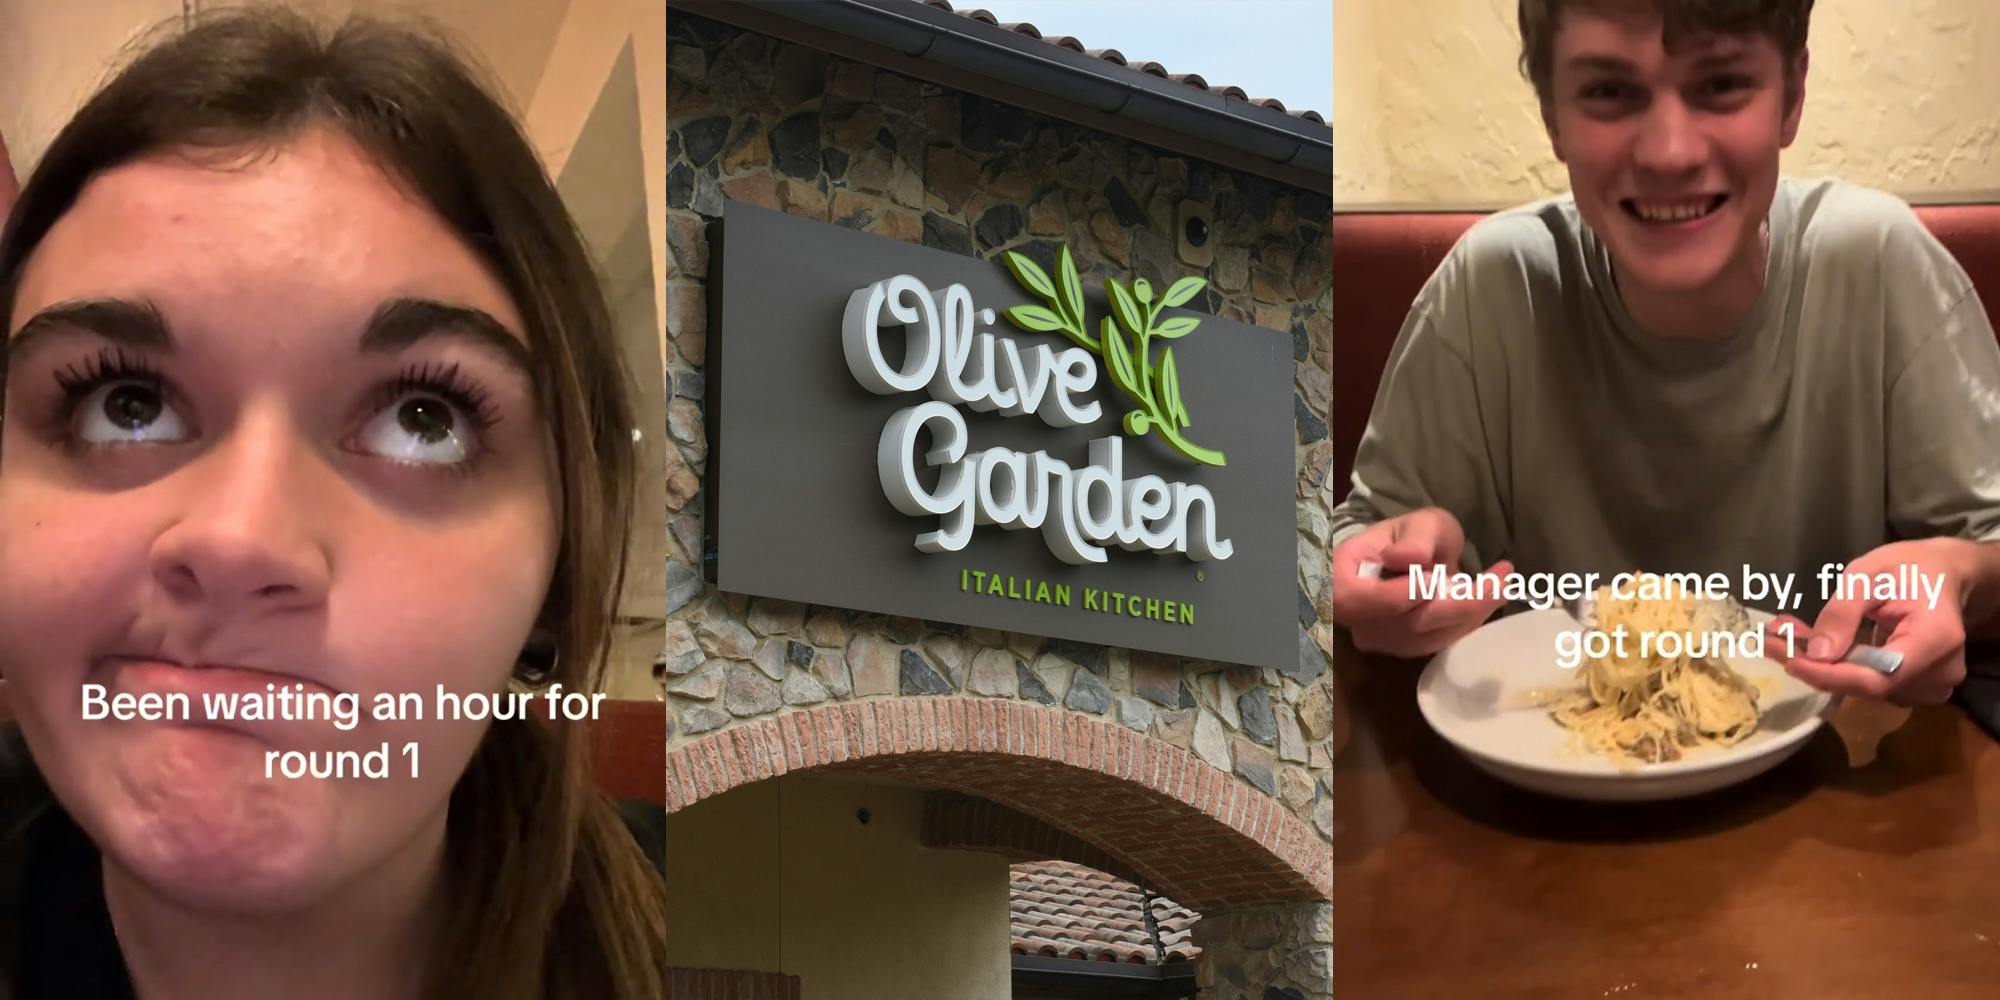 Olive Garden customer with caption "Been waiting an hour for round 1" (l) Olive Garden sign on building (c) Olive Garden customer eating with caption "Manager came by, finally got round 1" (r)